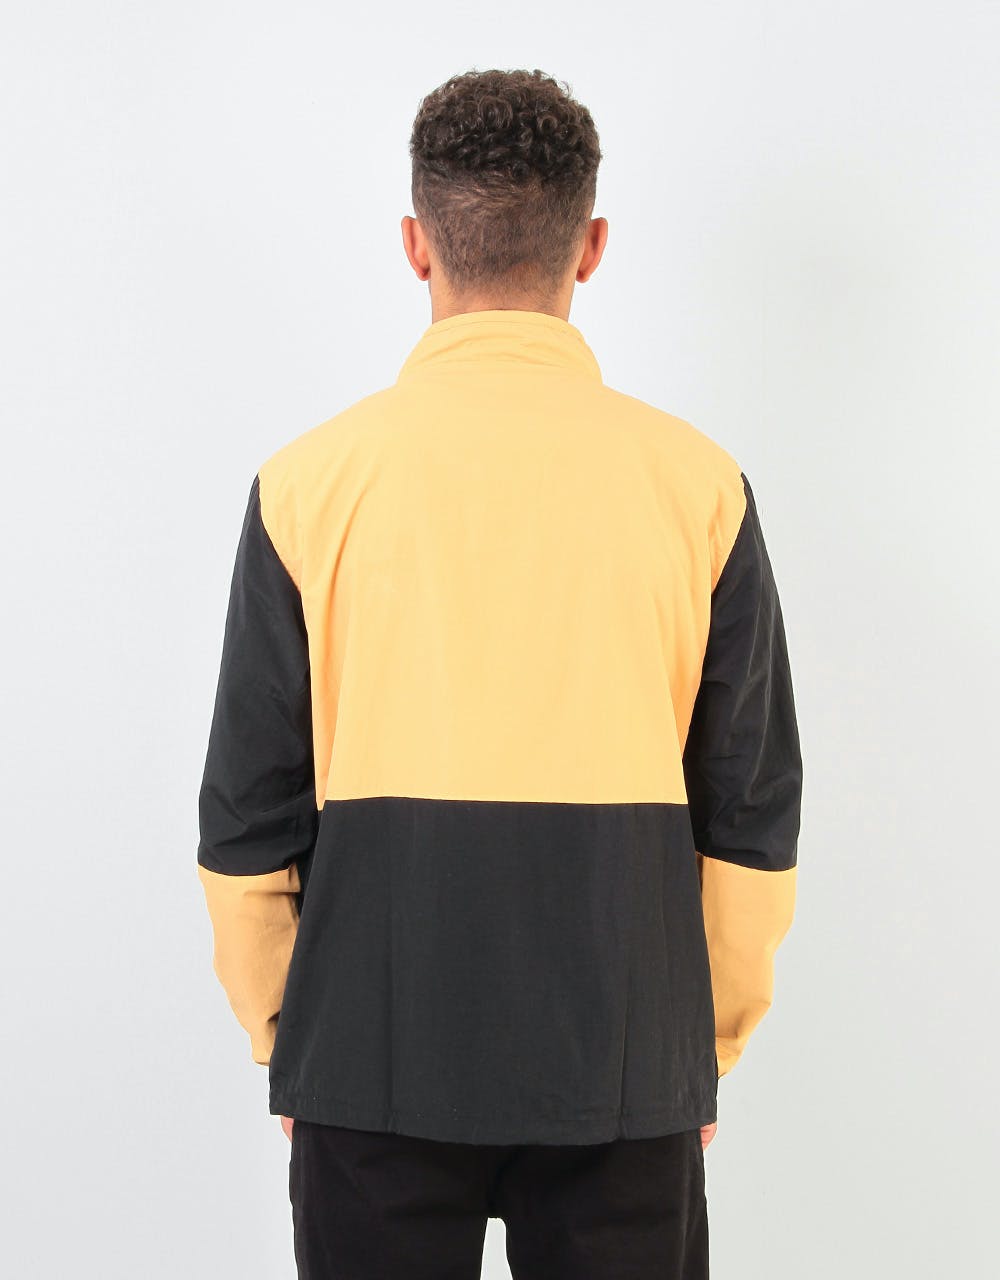 Butter Goods Search Jacket - Black/Peach